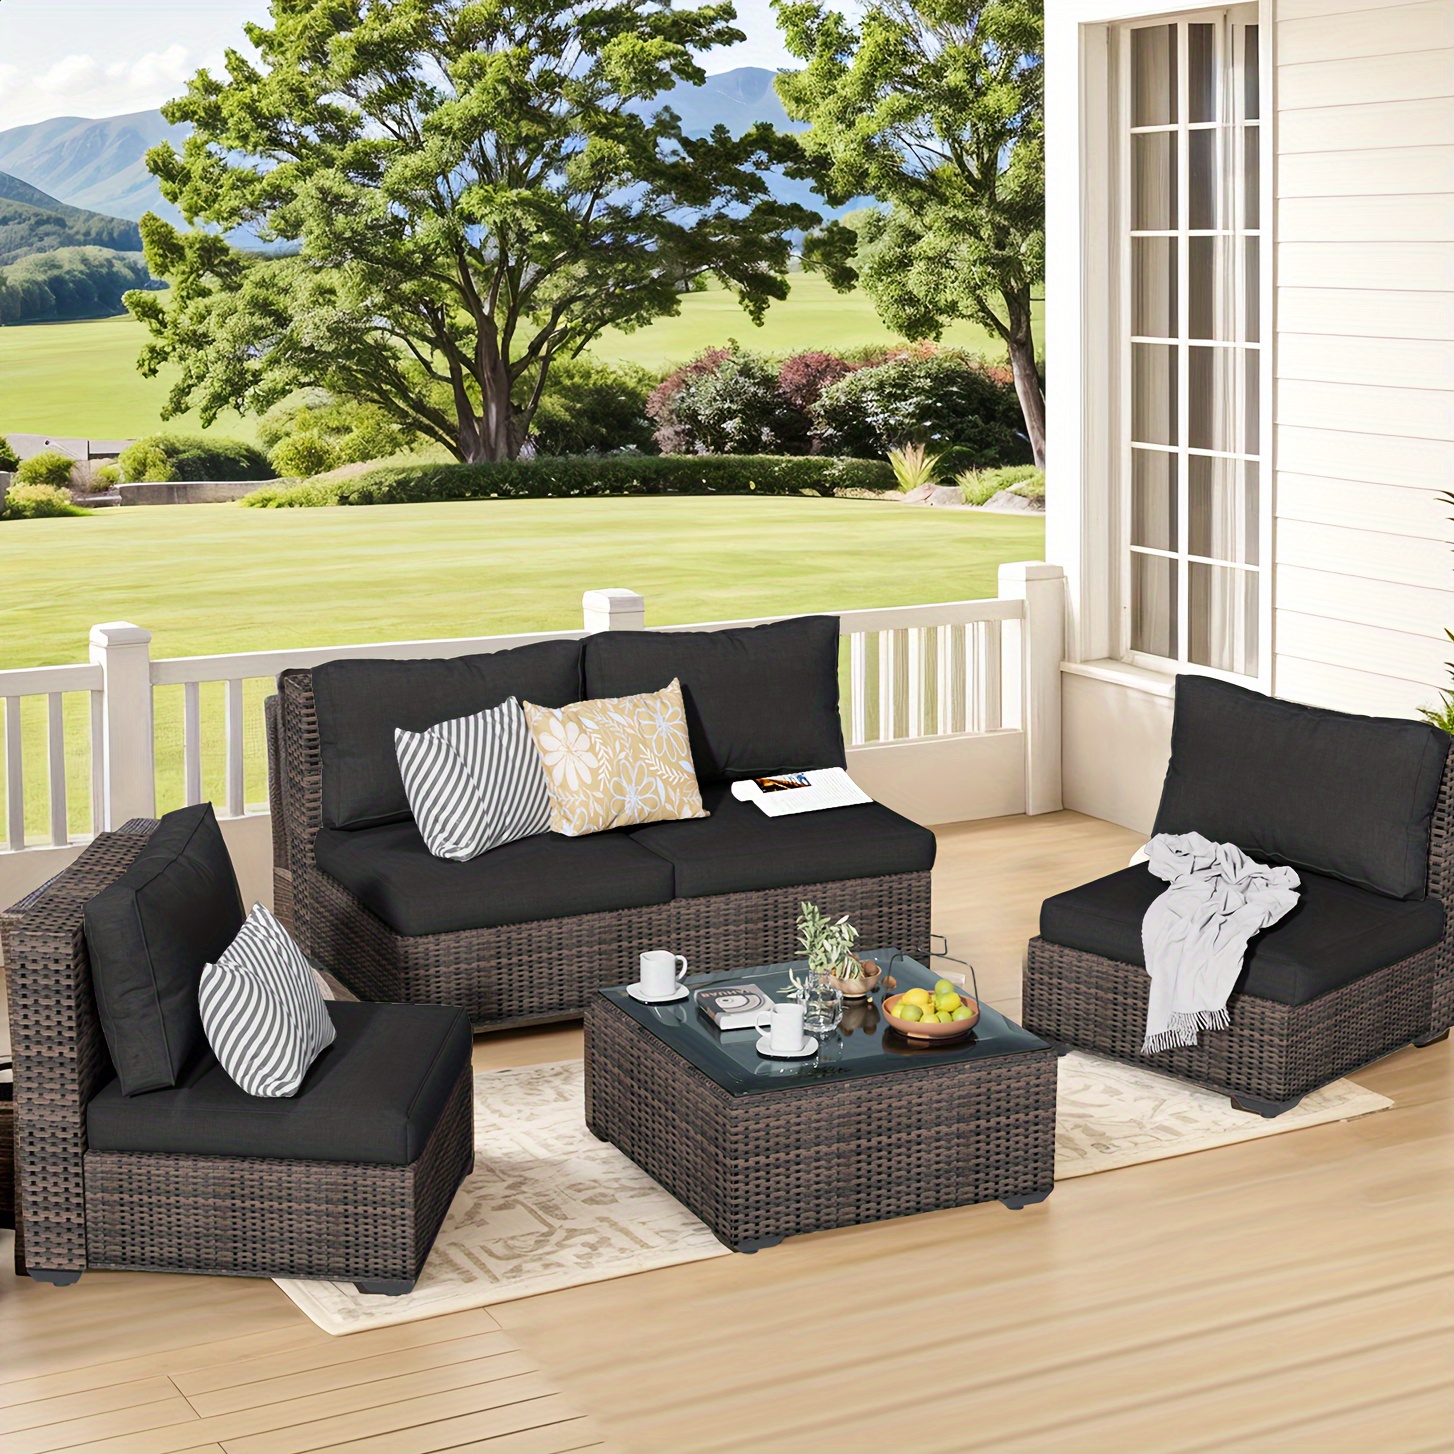 

5 Piece Patio Furniture Set With Glass Table, Wicker Rattan Outdoor Patio Sectional Conversation Set